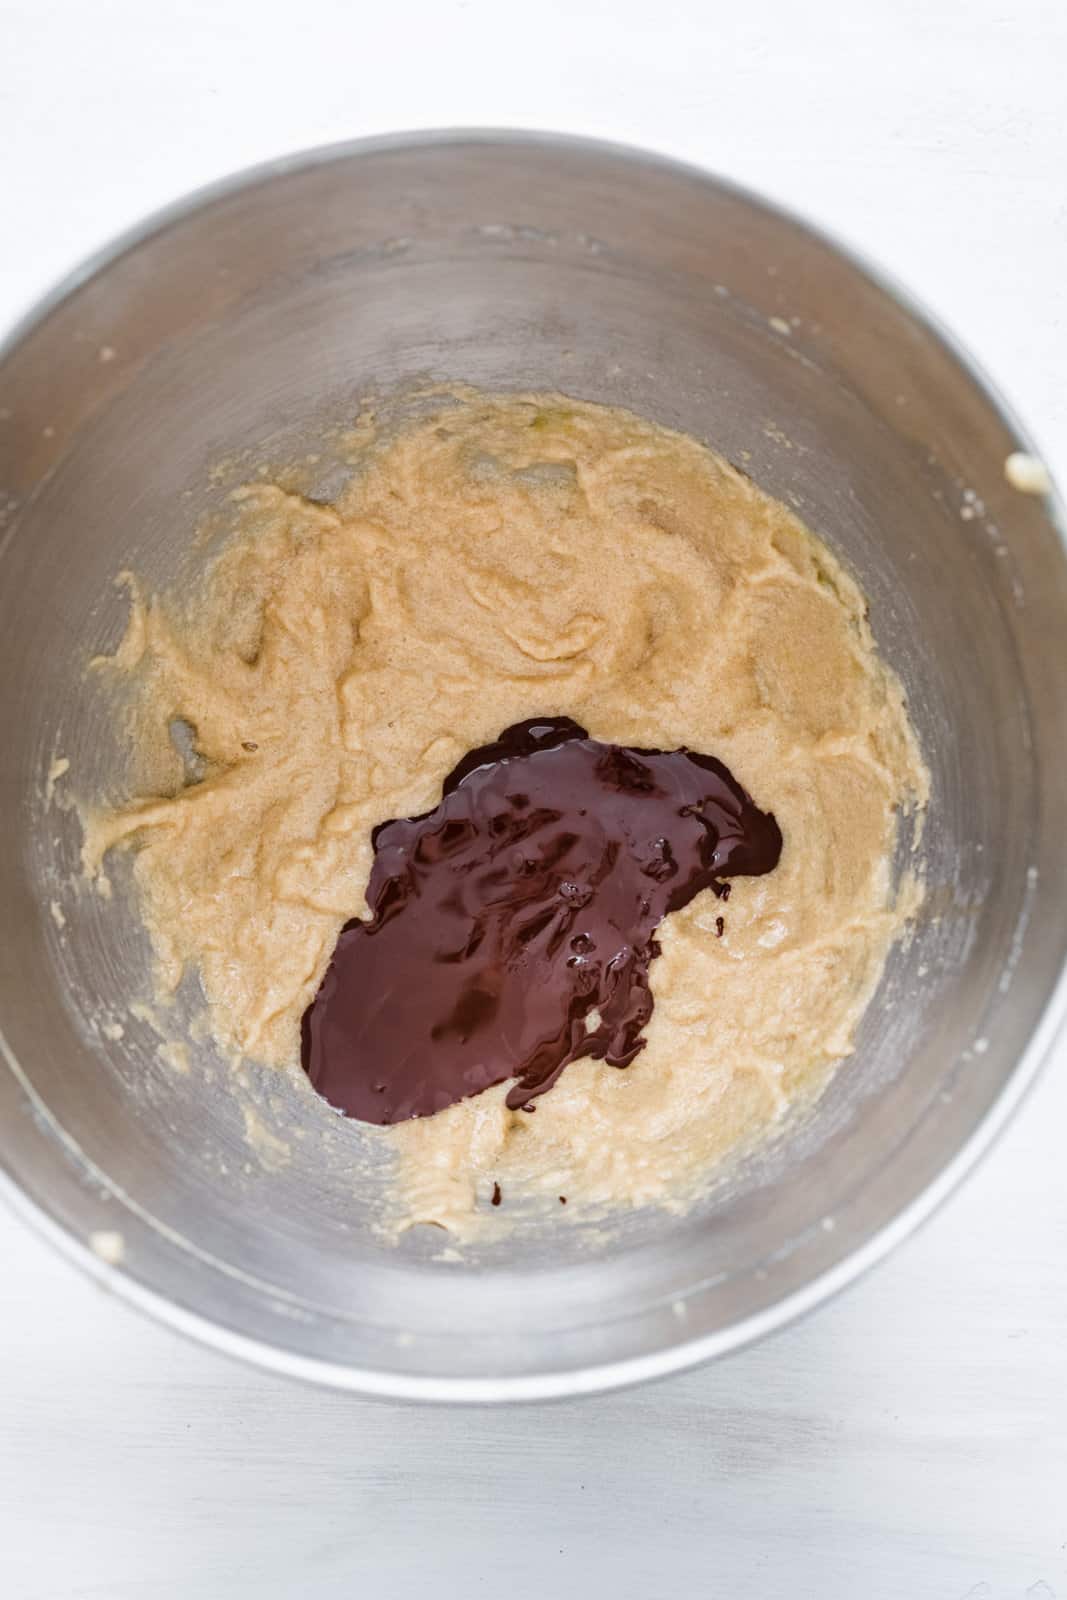 Melted chocolate added to the bowl of the stand mixer.